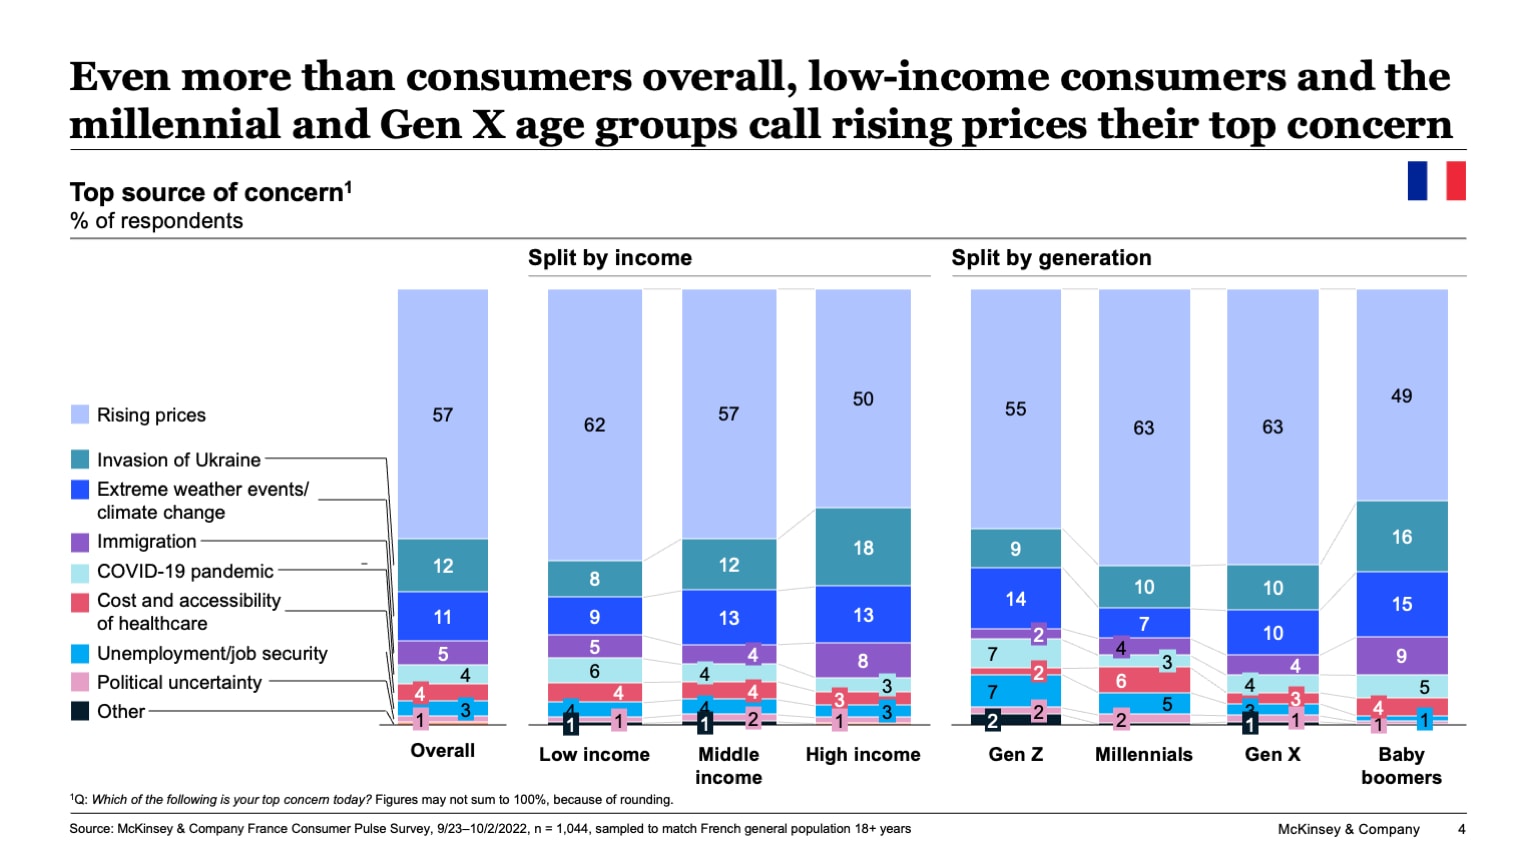 Even more than consumers overall, low-income consumers and the millennial and Gen X age groups call rising prices their top concern 